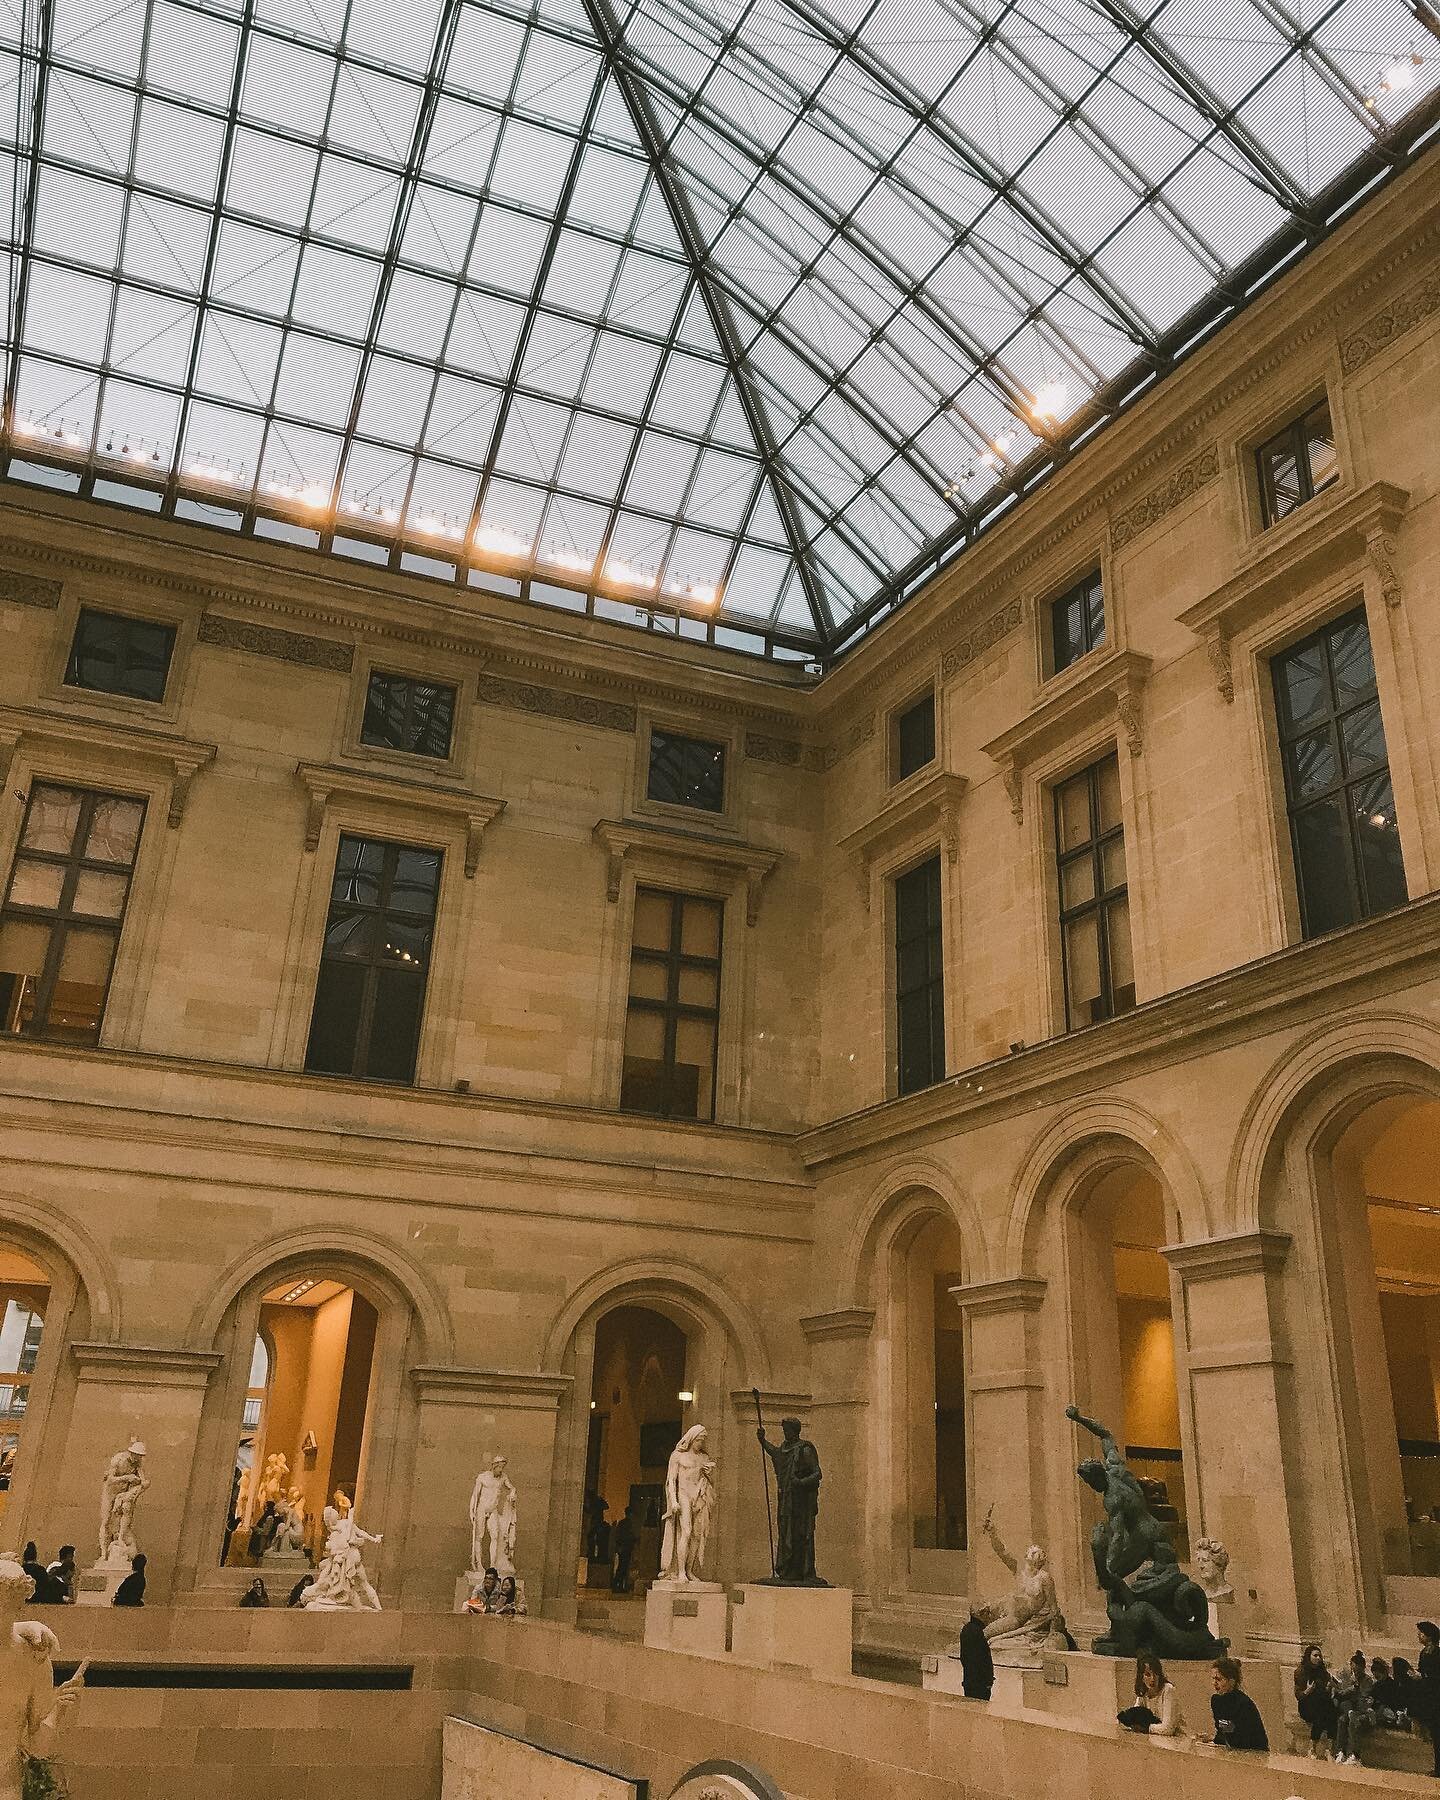 Tell me one thing you miss about Paris. We&rsquo;ll go first: the Louvre.